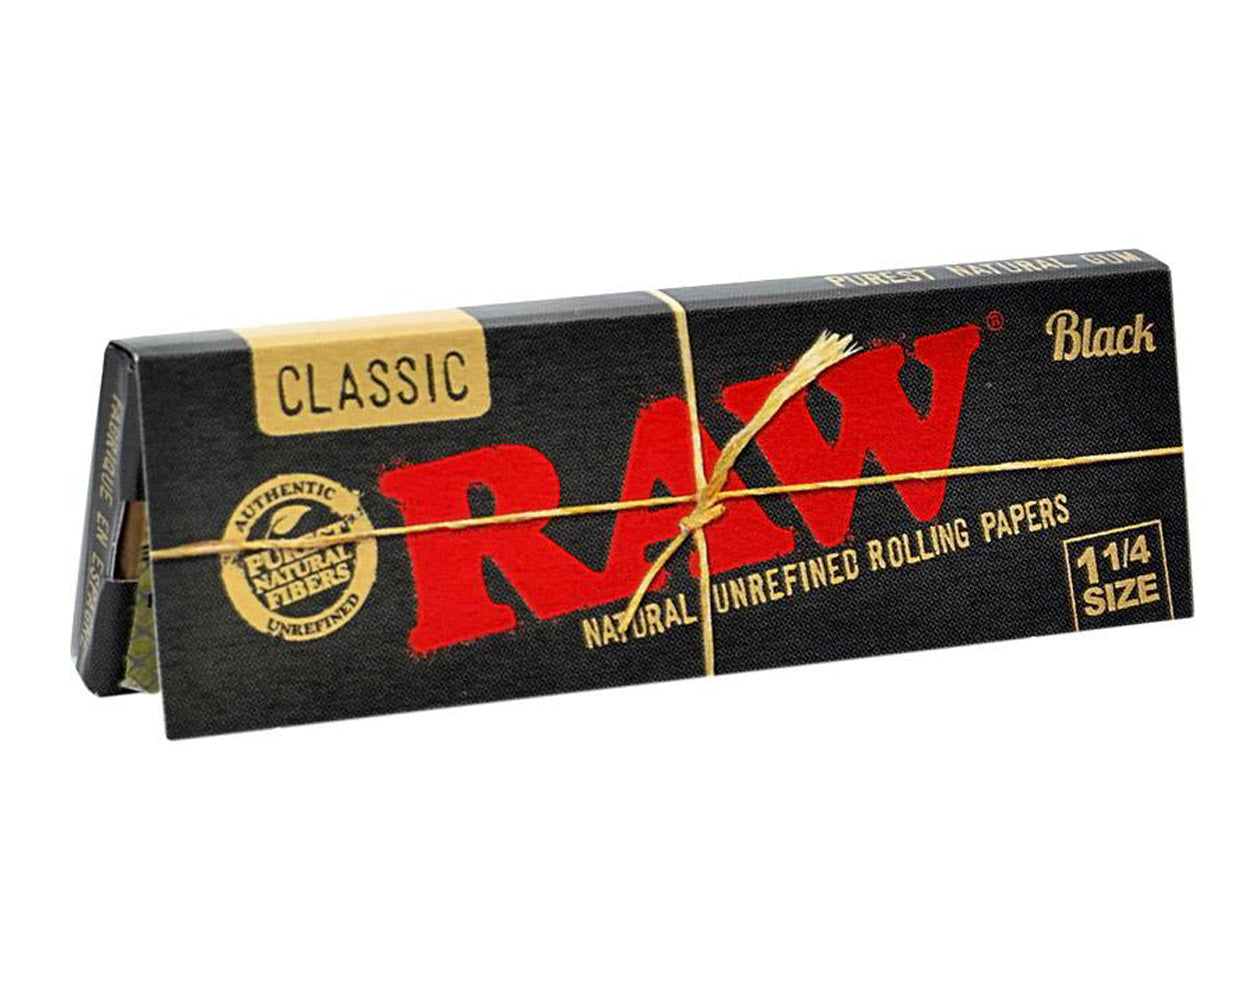 RAW | 'Retail Display' 1 1/4 Size Black Natural Rolling Papers | 83mm - Classic - 24 Count - 3